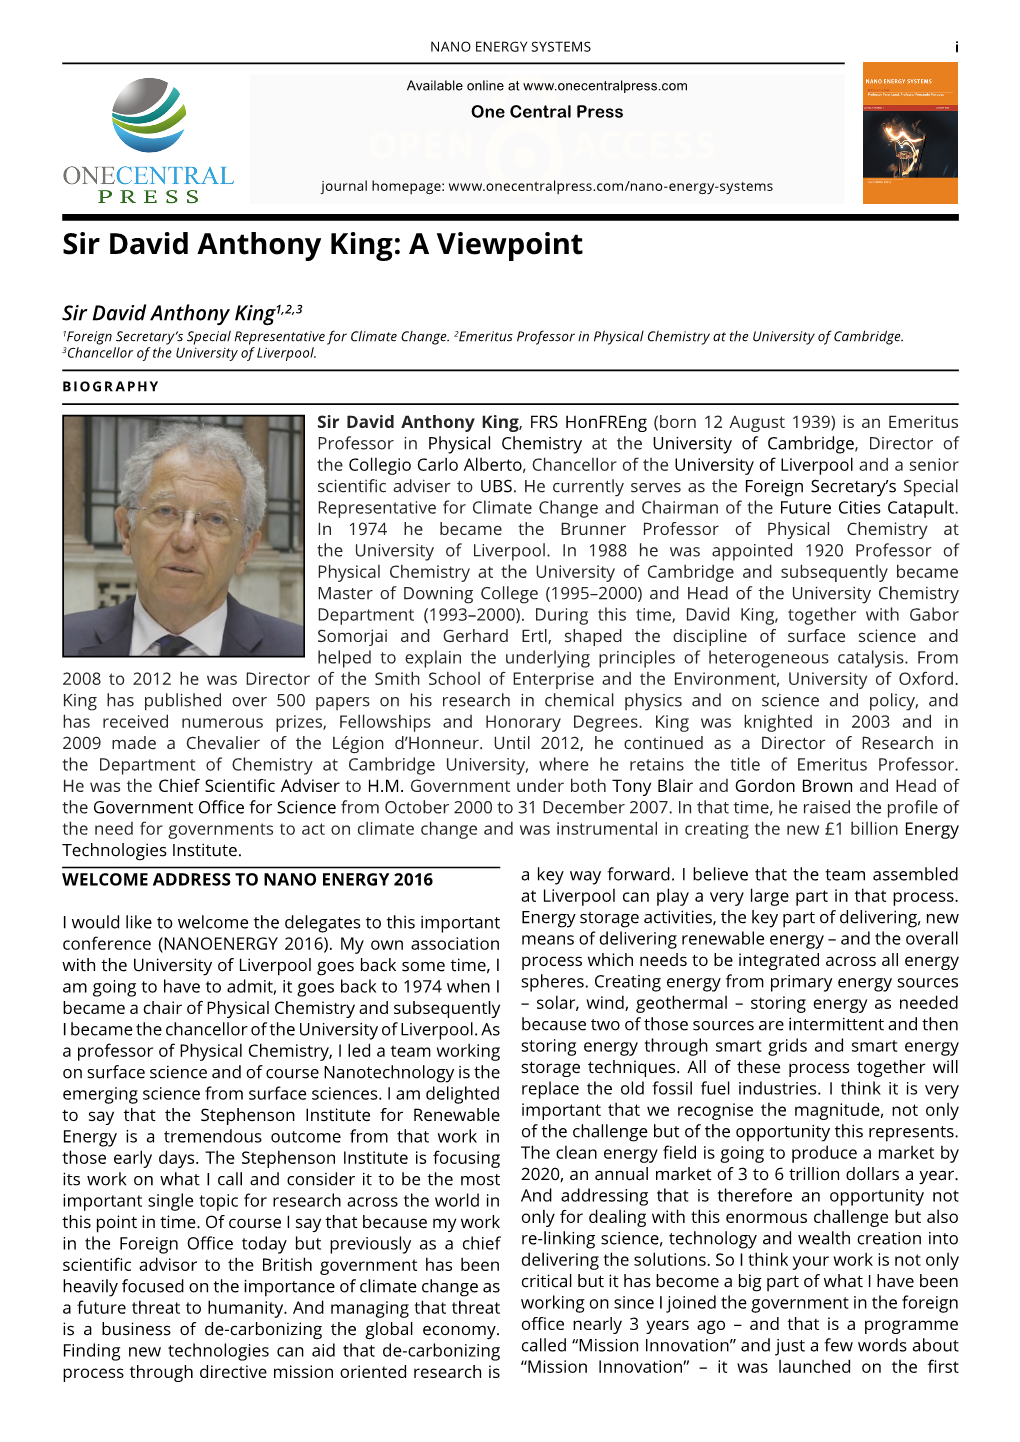 Sir David Anthony King: a Viewpoint